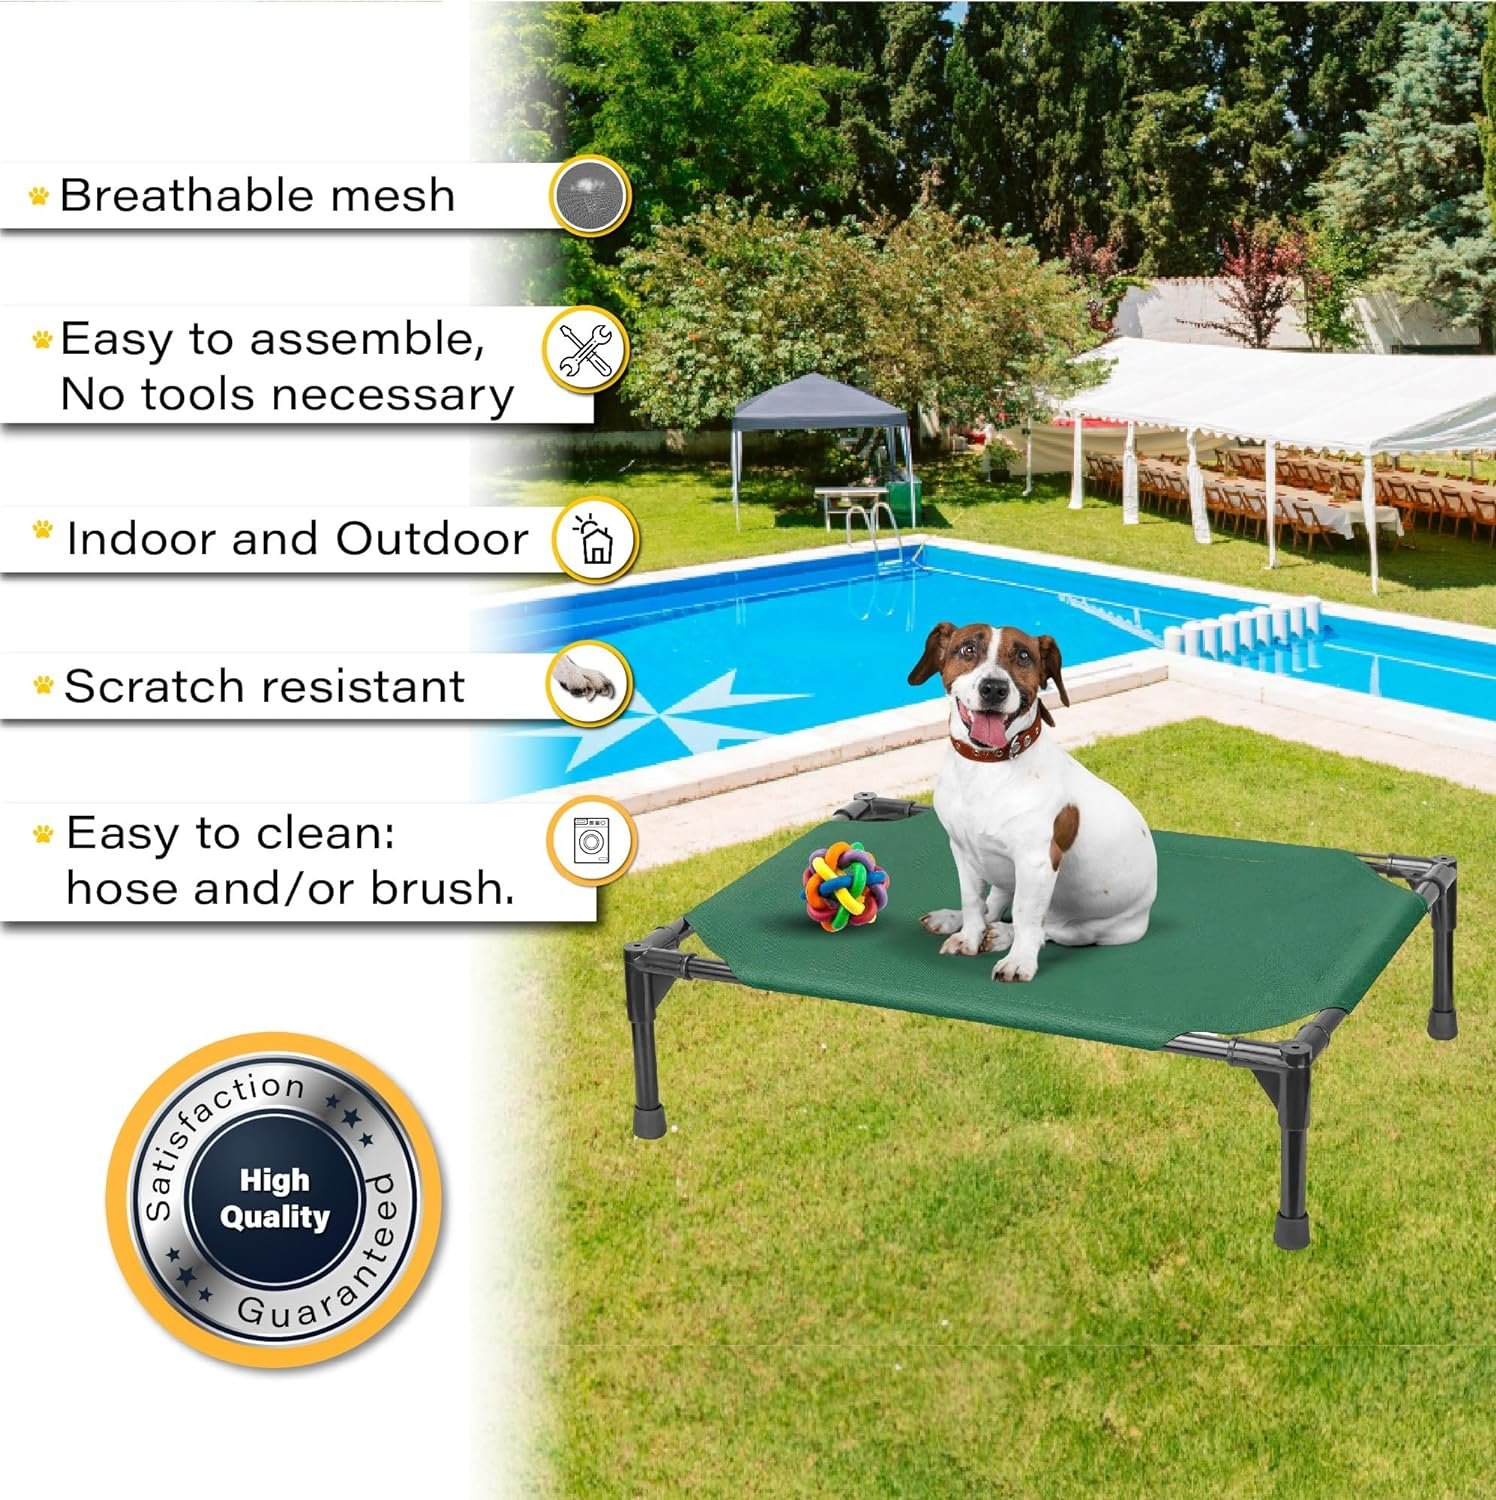 Moonlight Elevated Dog Bed – Outdoor Cooling Raised Dog Beds for Large Dogs Small Medium Large Extra Large Dog Bed Portable Pet Couch Cat Bed Breathable Mesh Washable Cot Bed (Large, Grey)